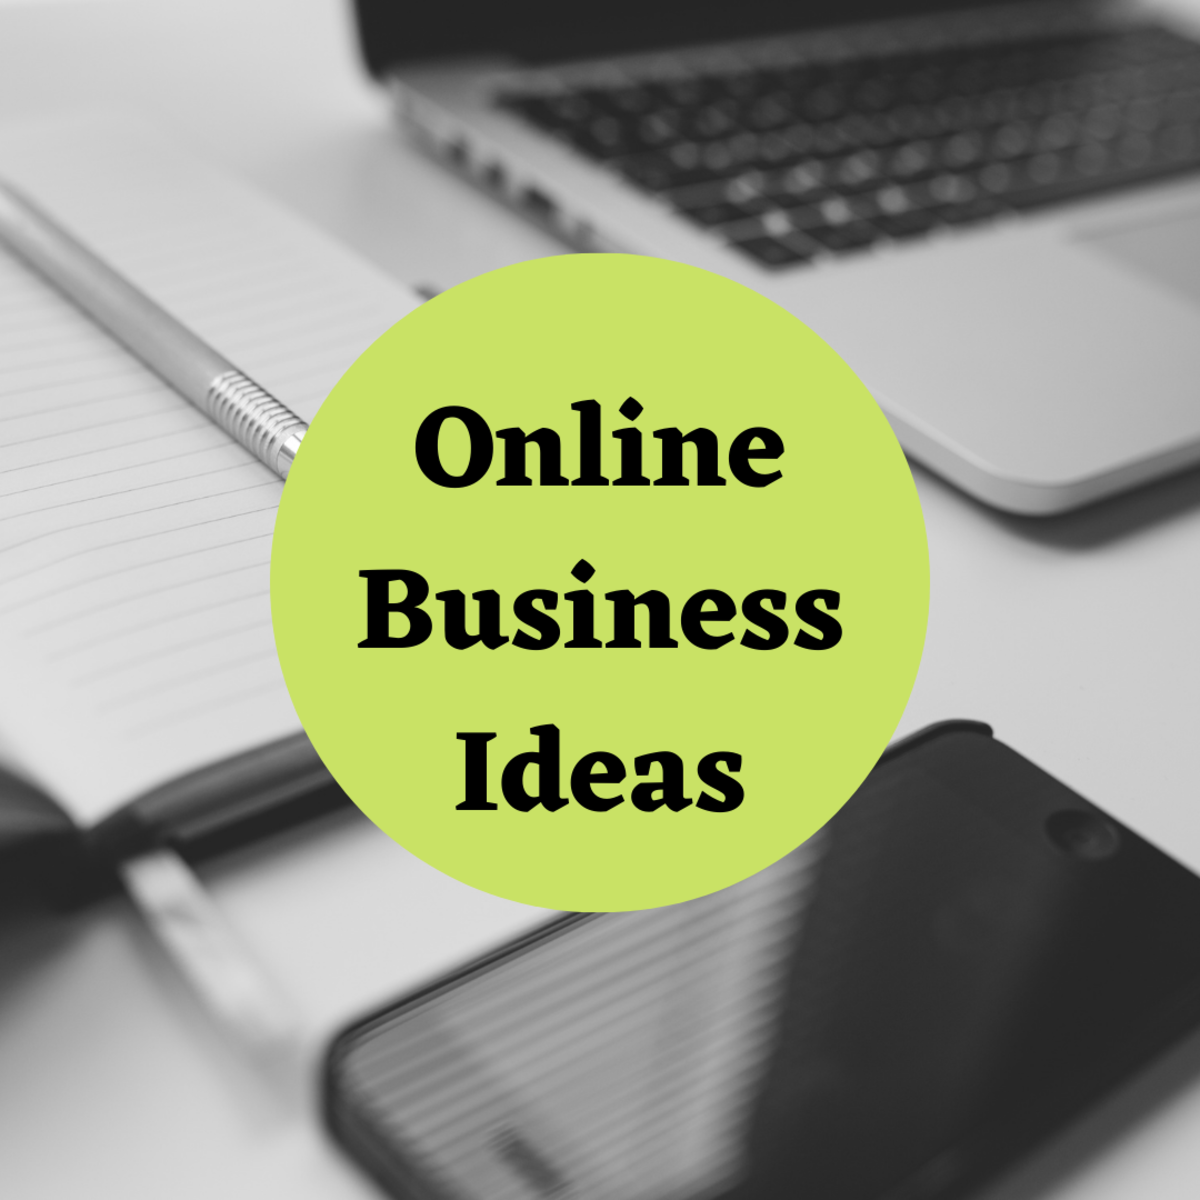 4 Trending Online Business Ideas You Can Start Immediately With No